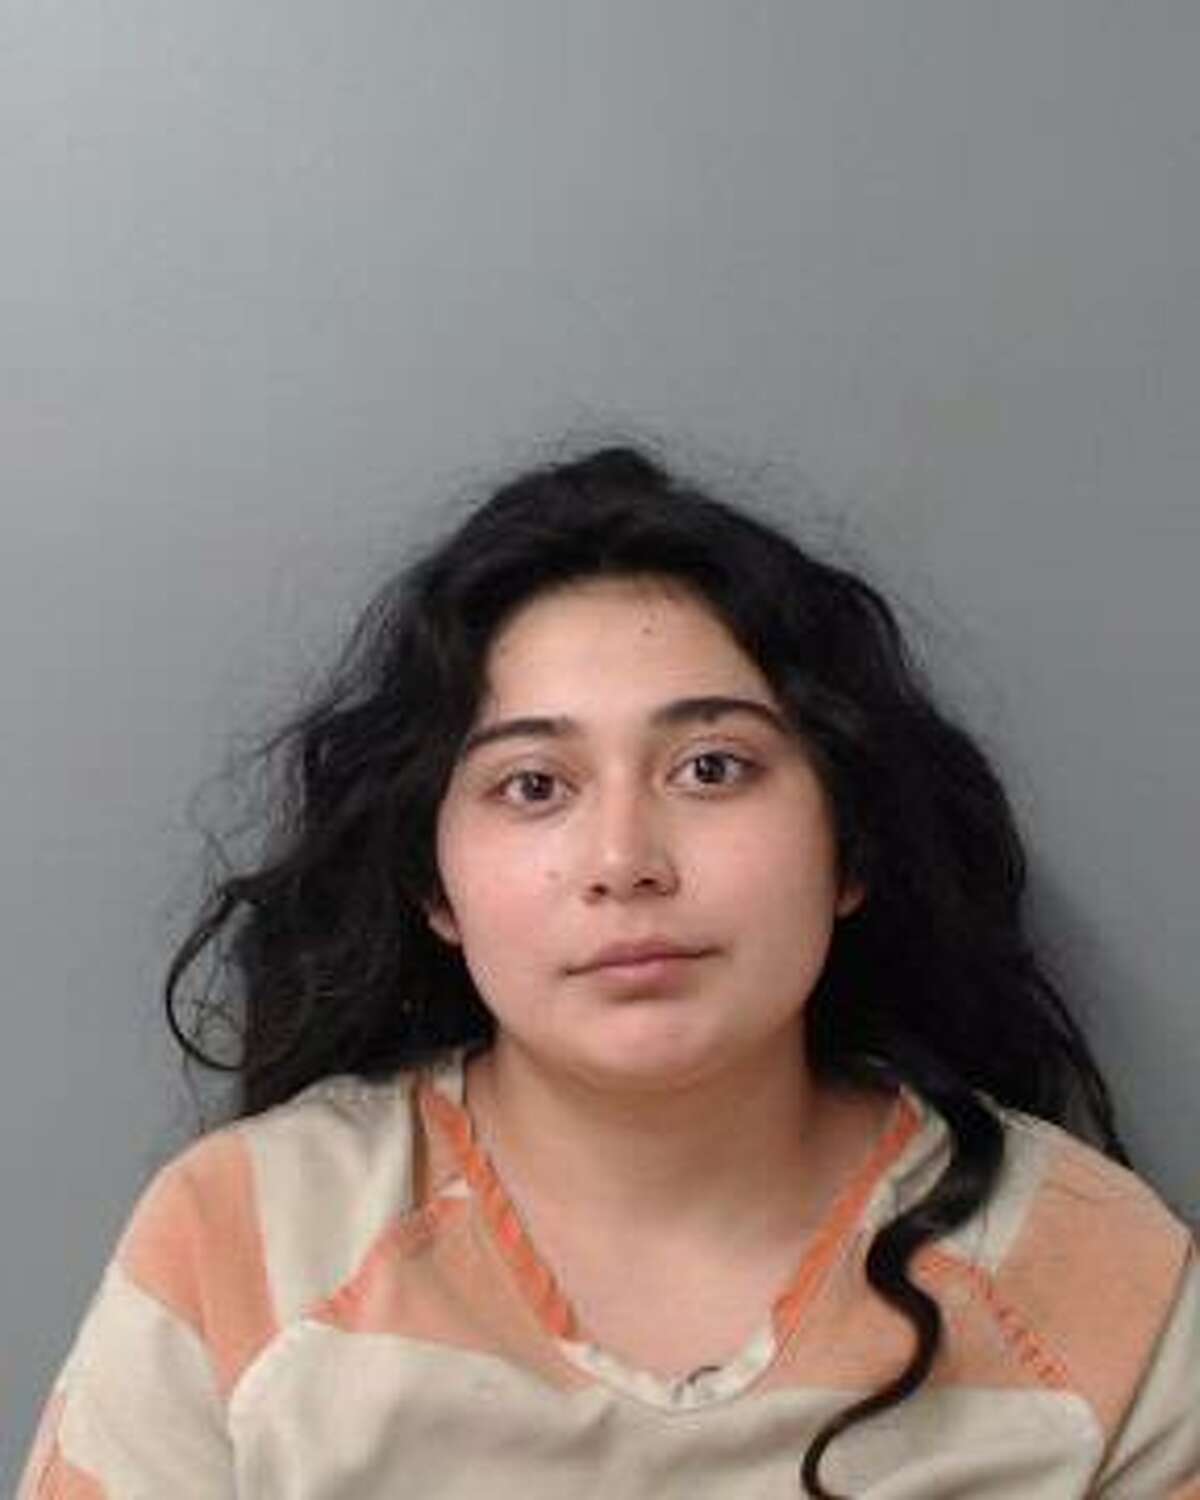 Consuelo Esperanza Venegas, assaulted a Laredo police officer and spat on his face, according to an arrest affidavit.